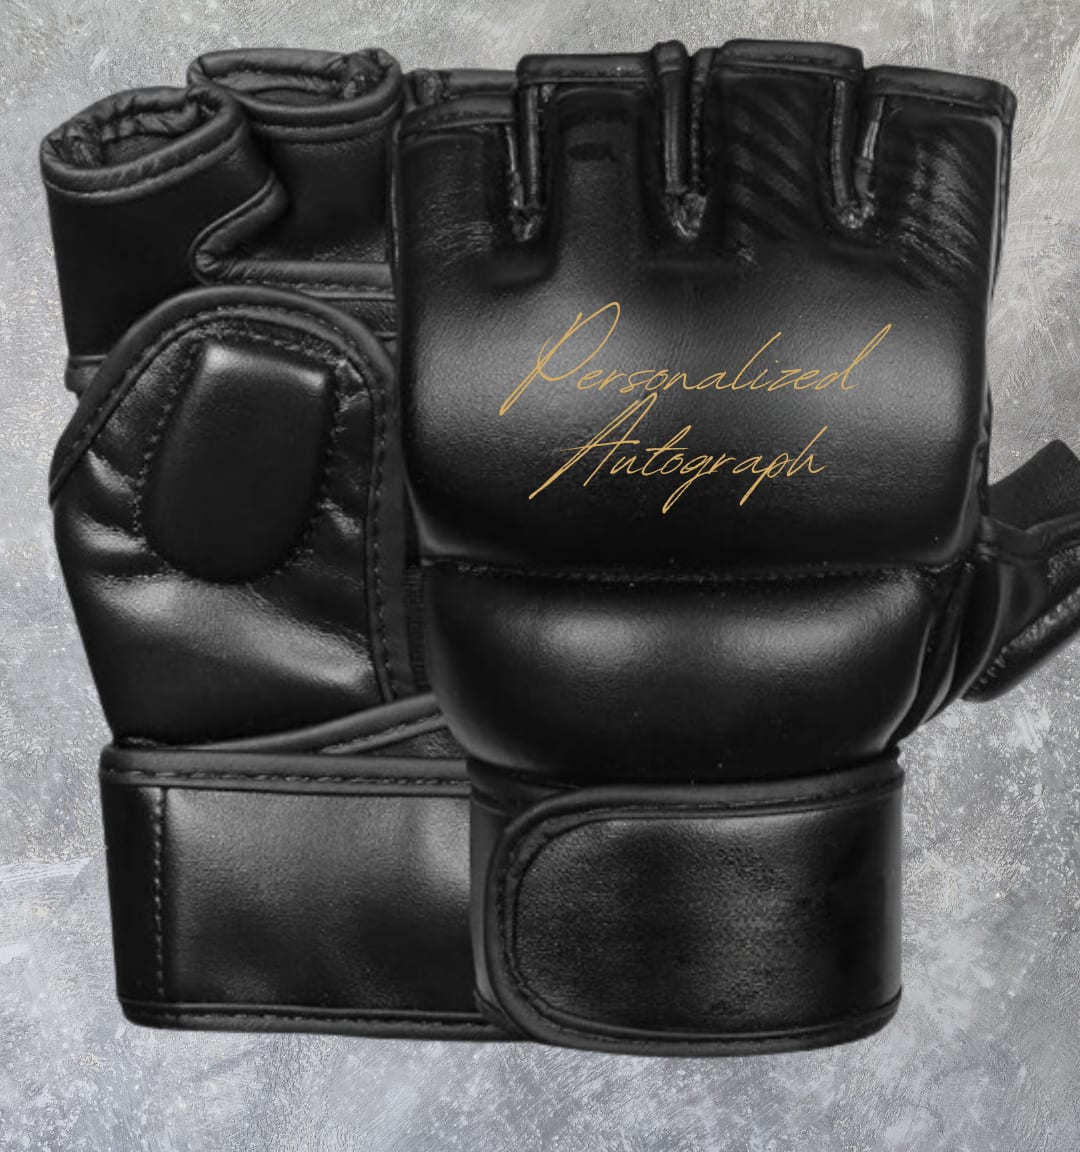 Limited Edition Liz Carmouche Autographed MMA Gloves